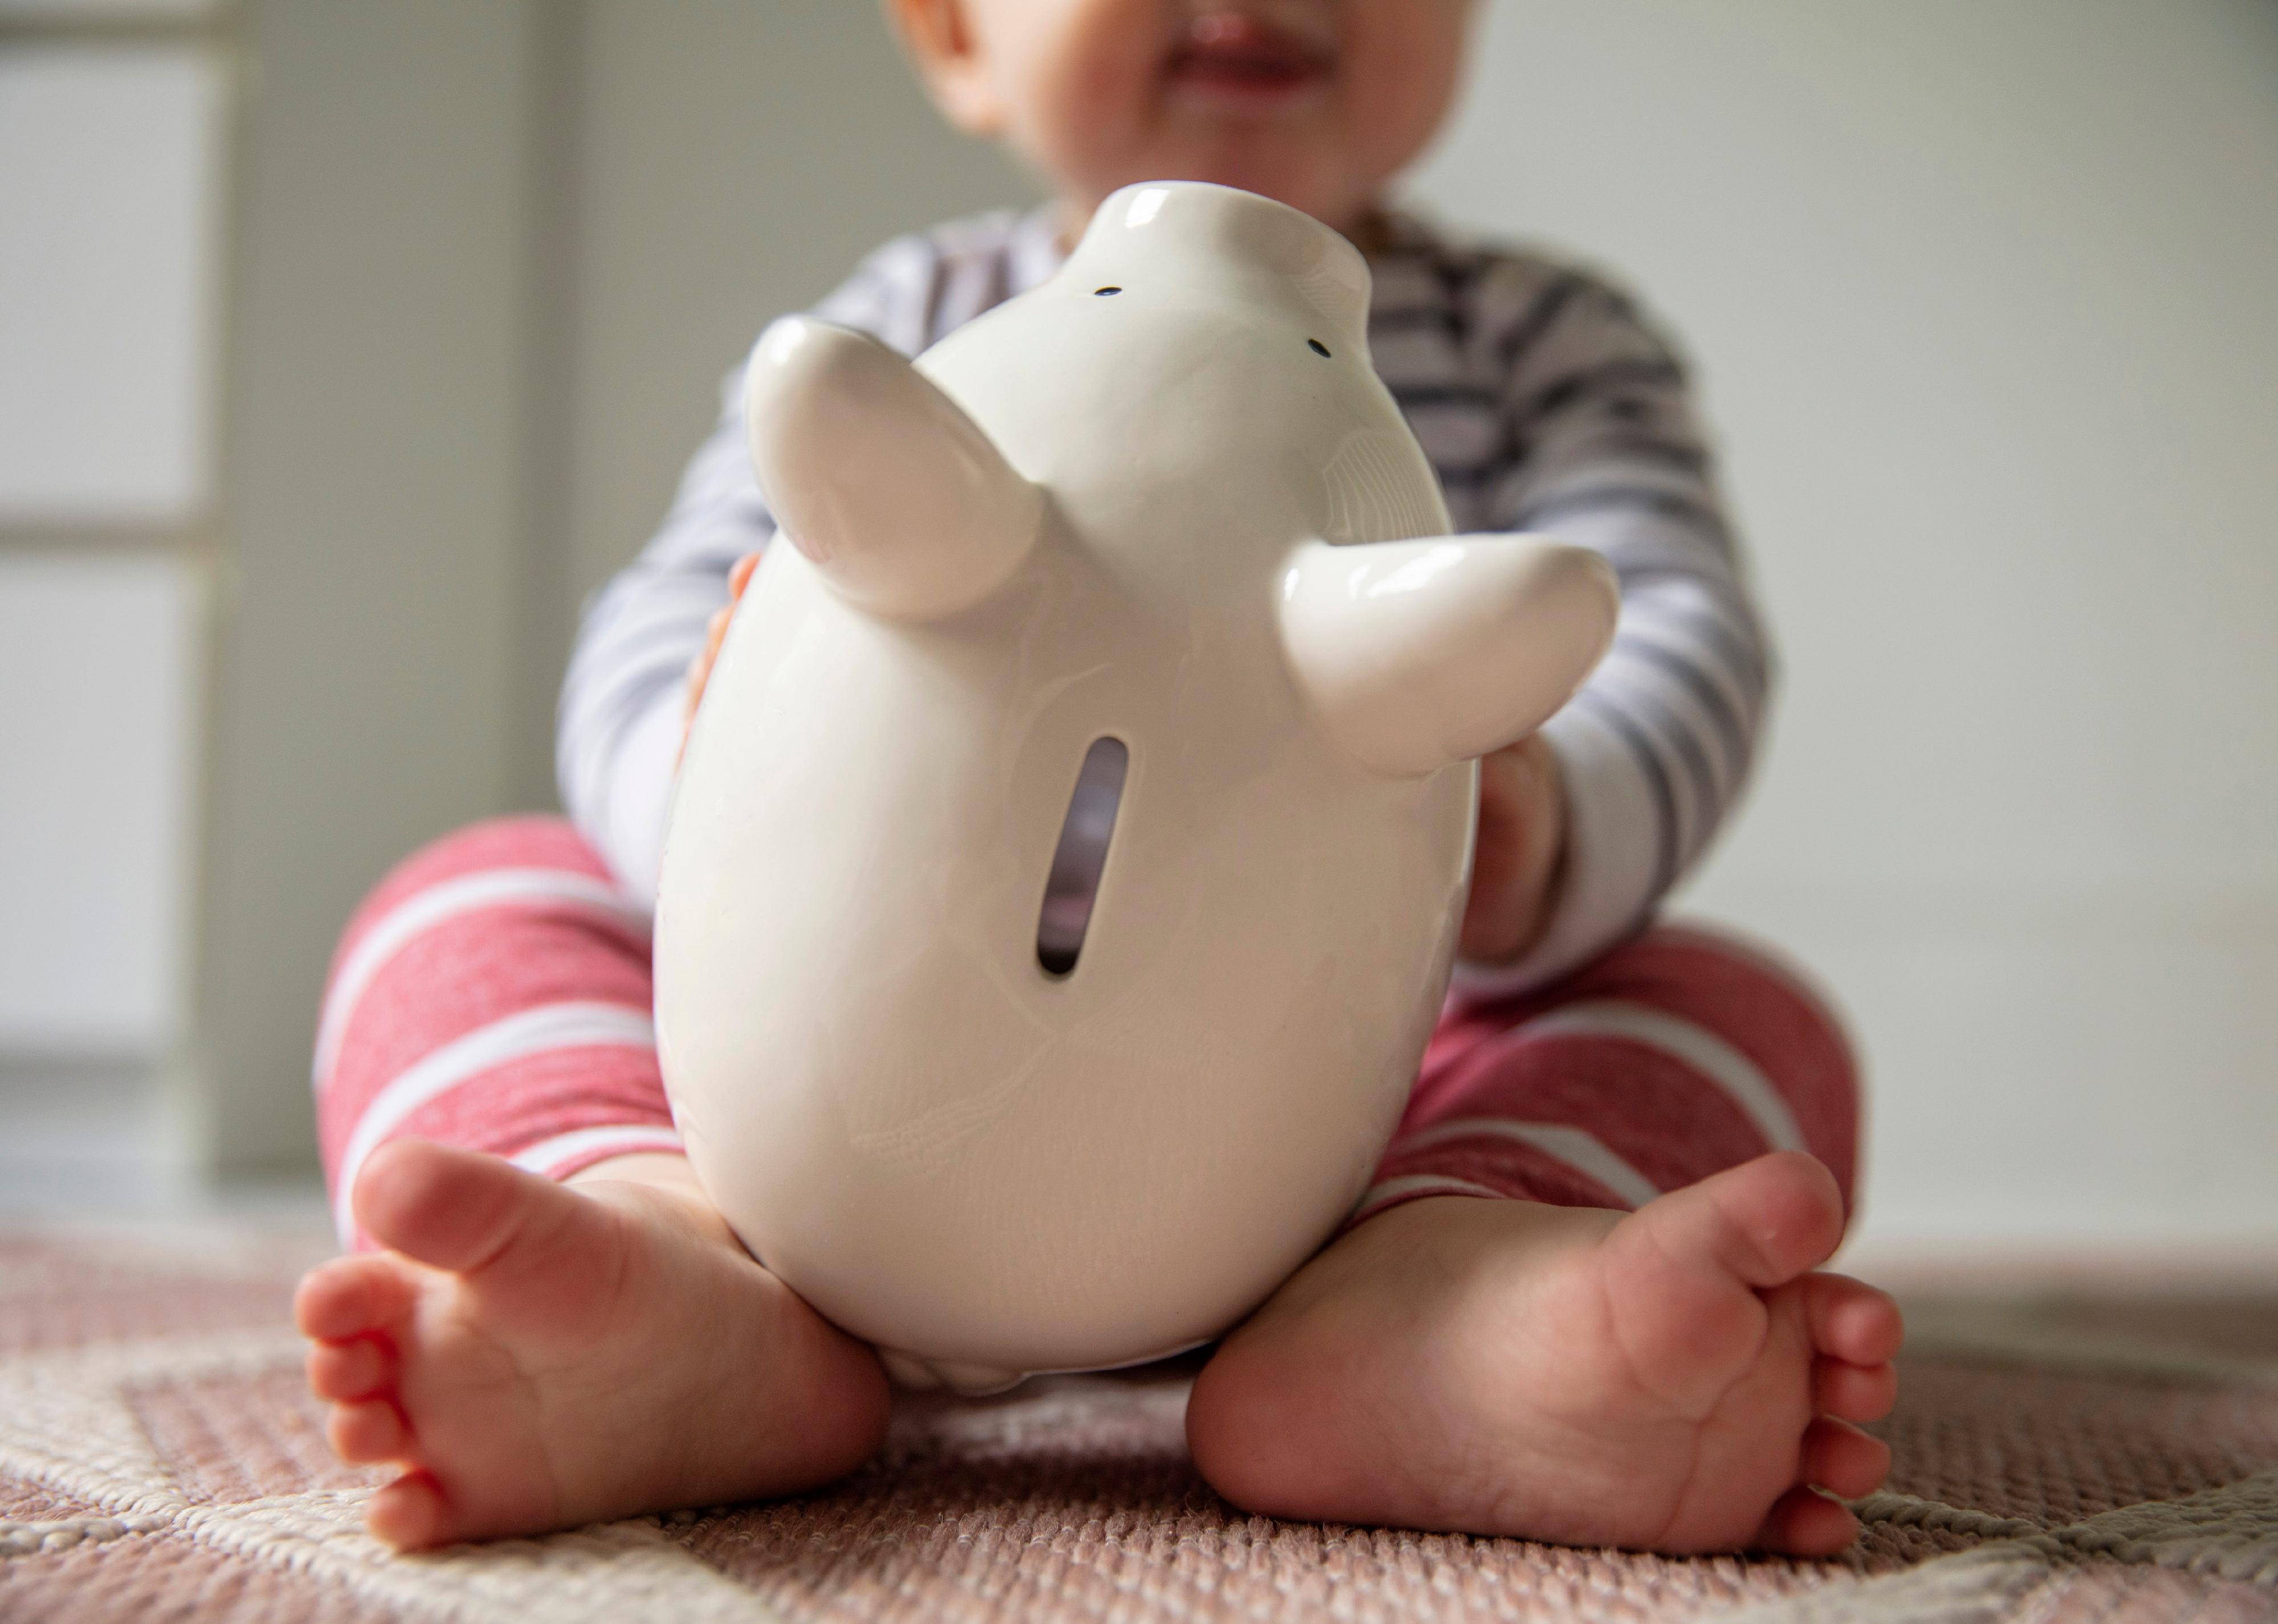 Young baby playing with a piggy bank.